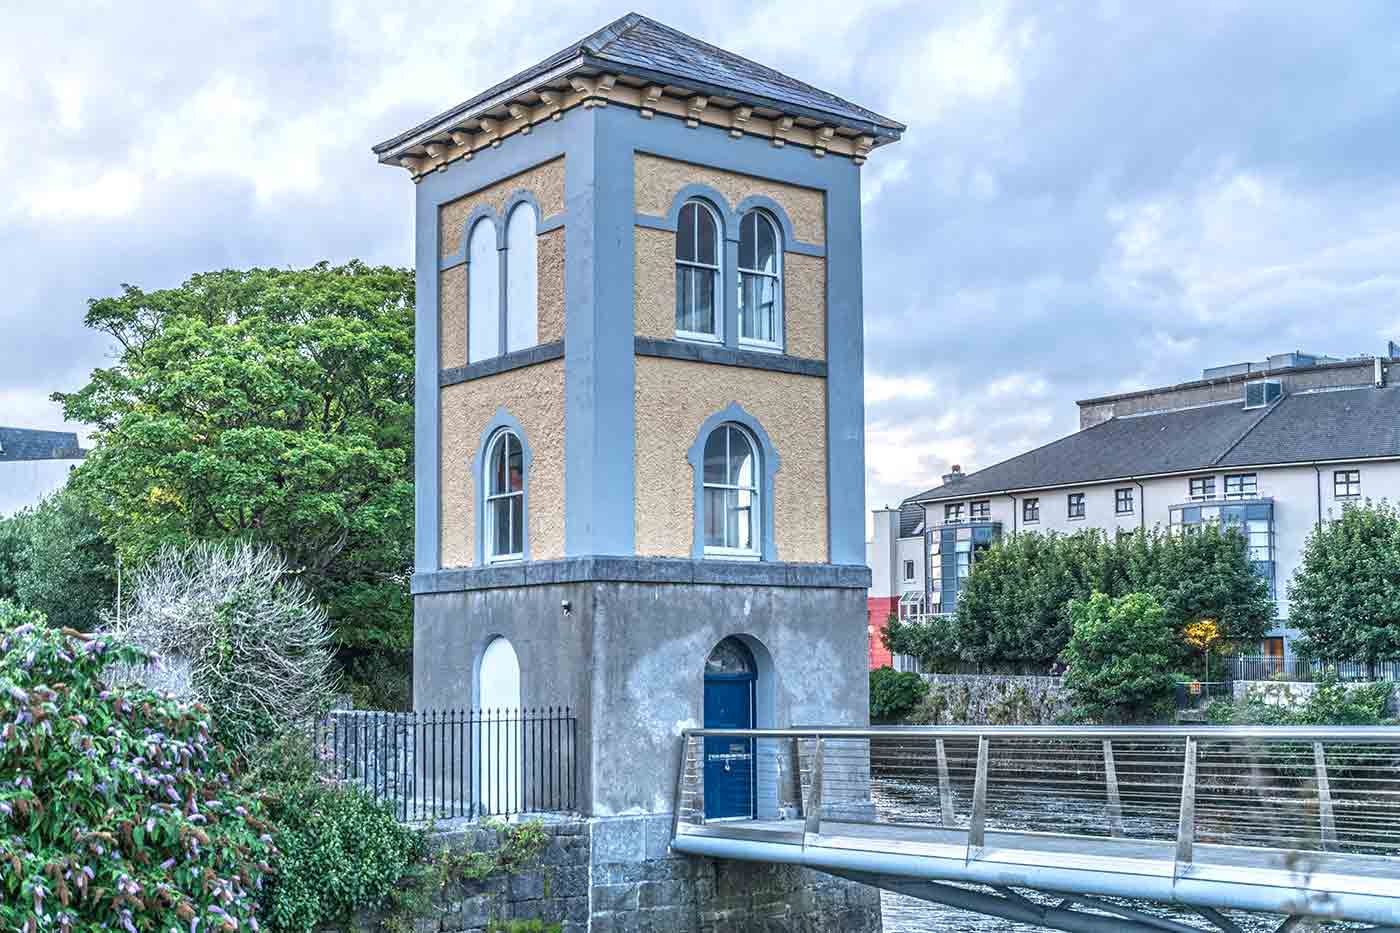 The Fisheries Watchtower Museum